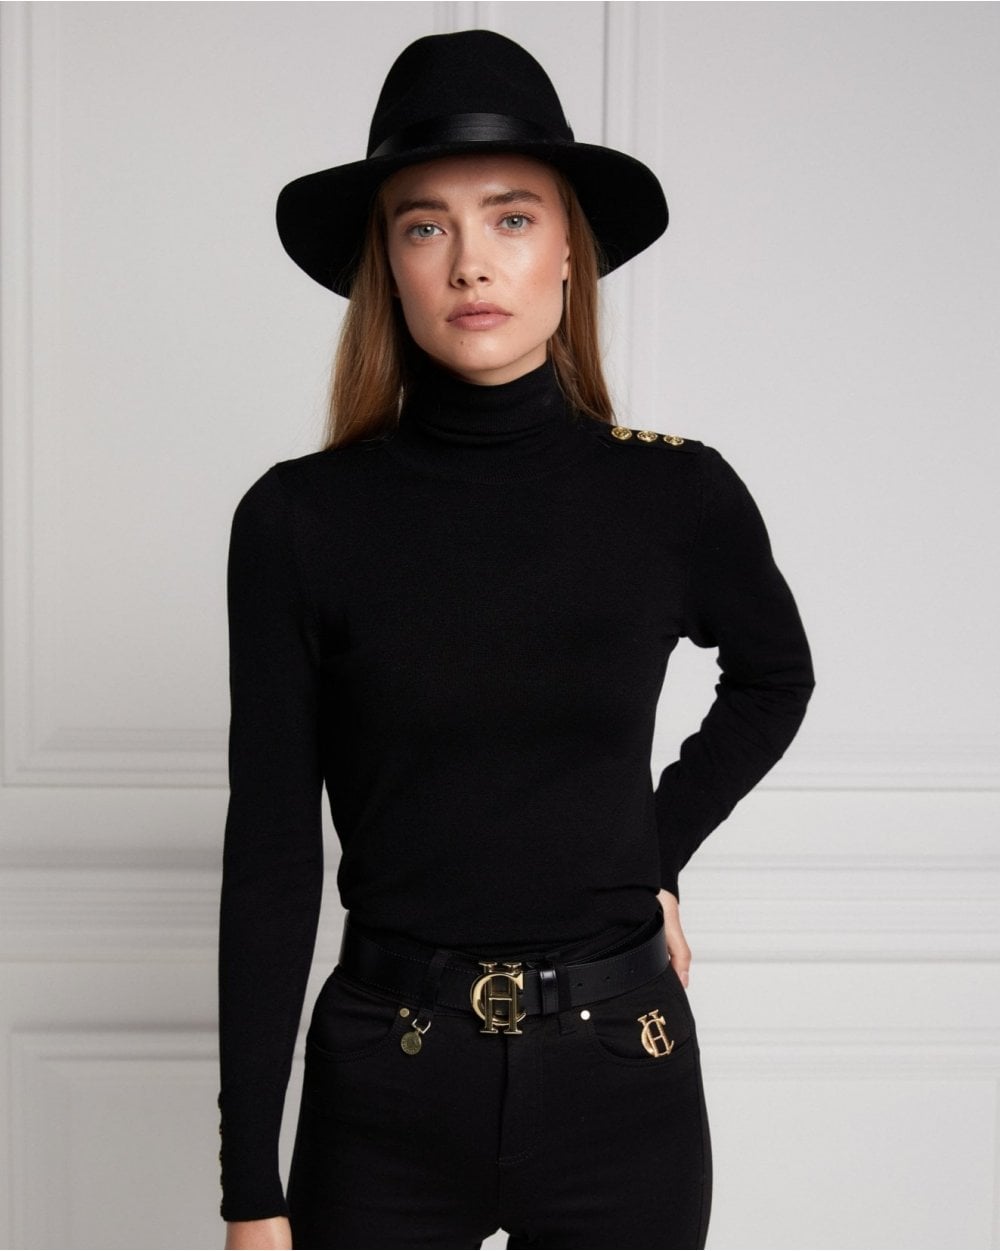 Buttoned Knit Roll Neck